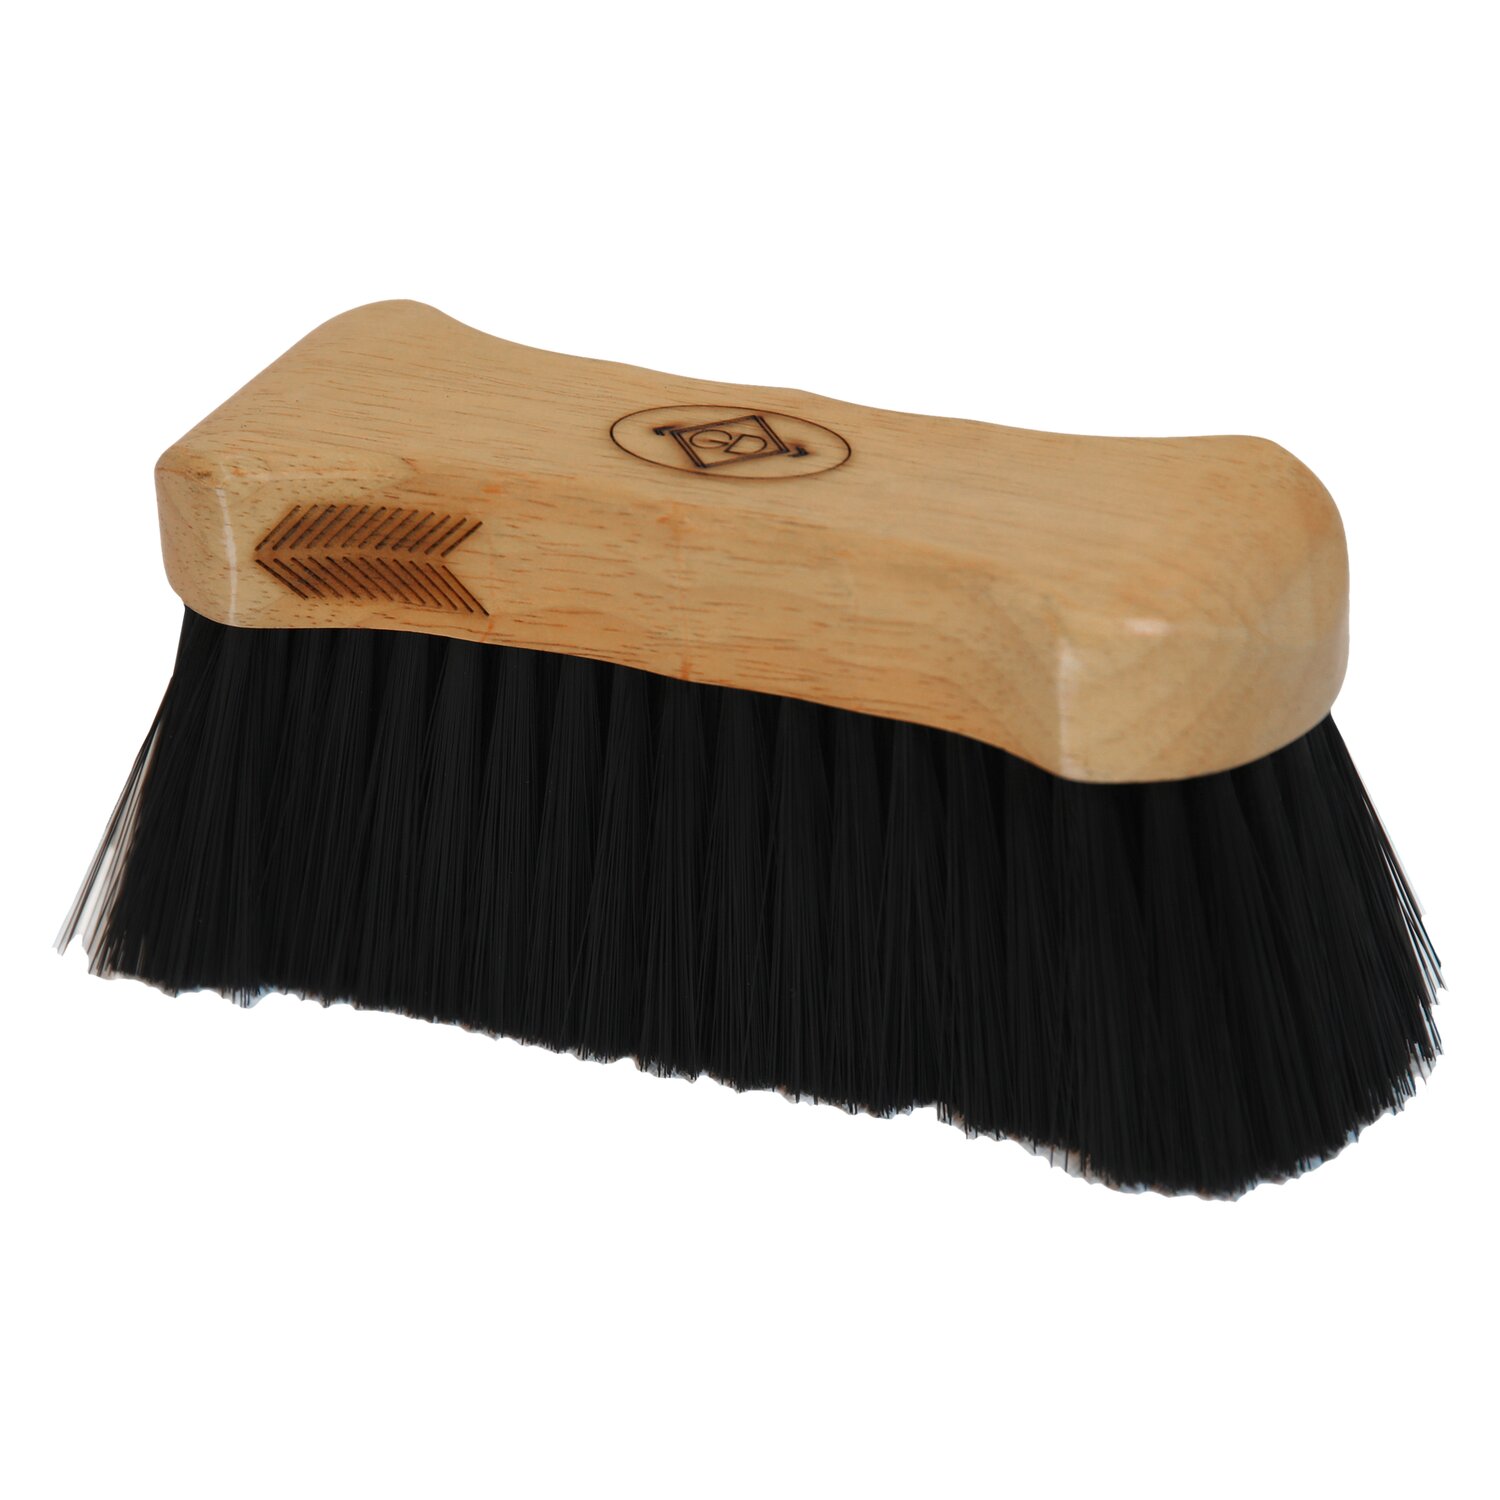 GROOMING DELUXE Body Brush middle hard